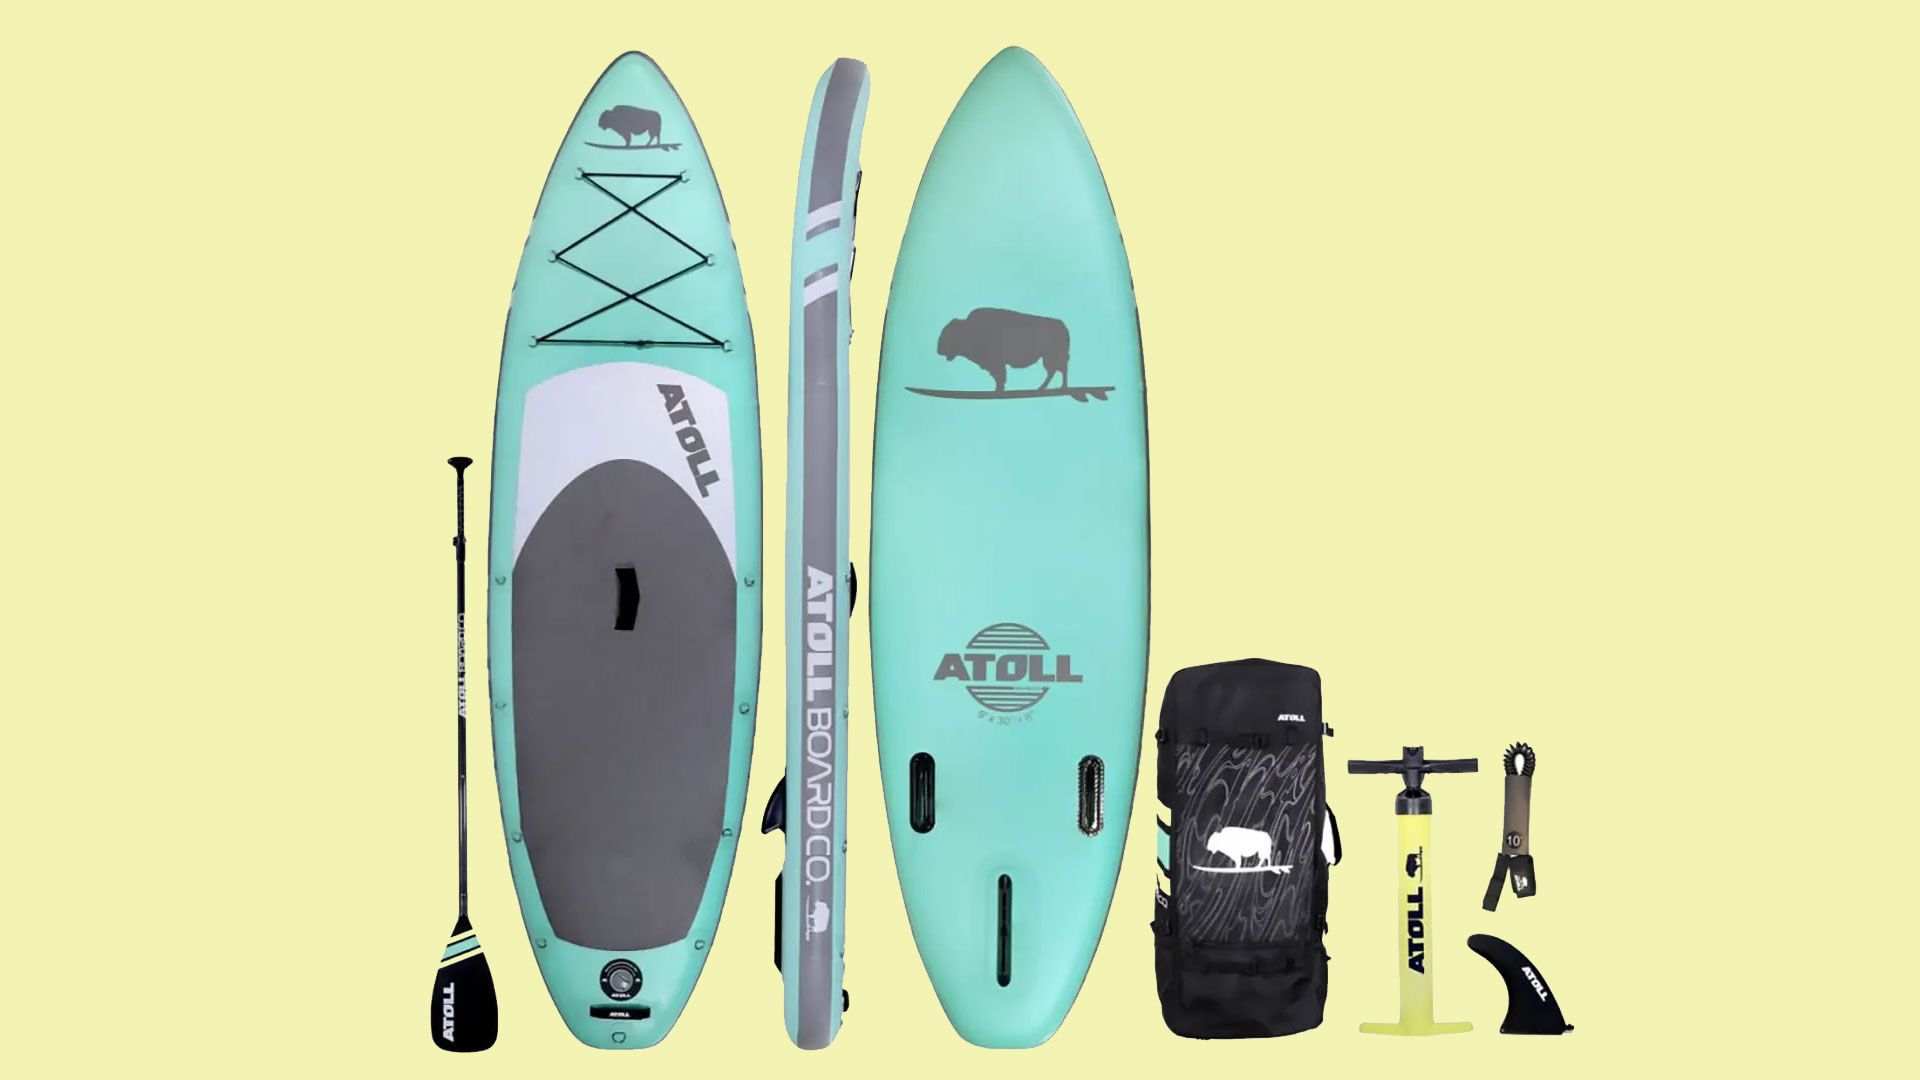 Rigid Vs Inflatable Paddle Boards: Which One's Are Better?